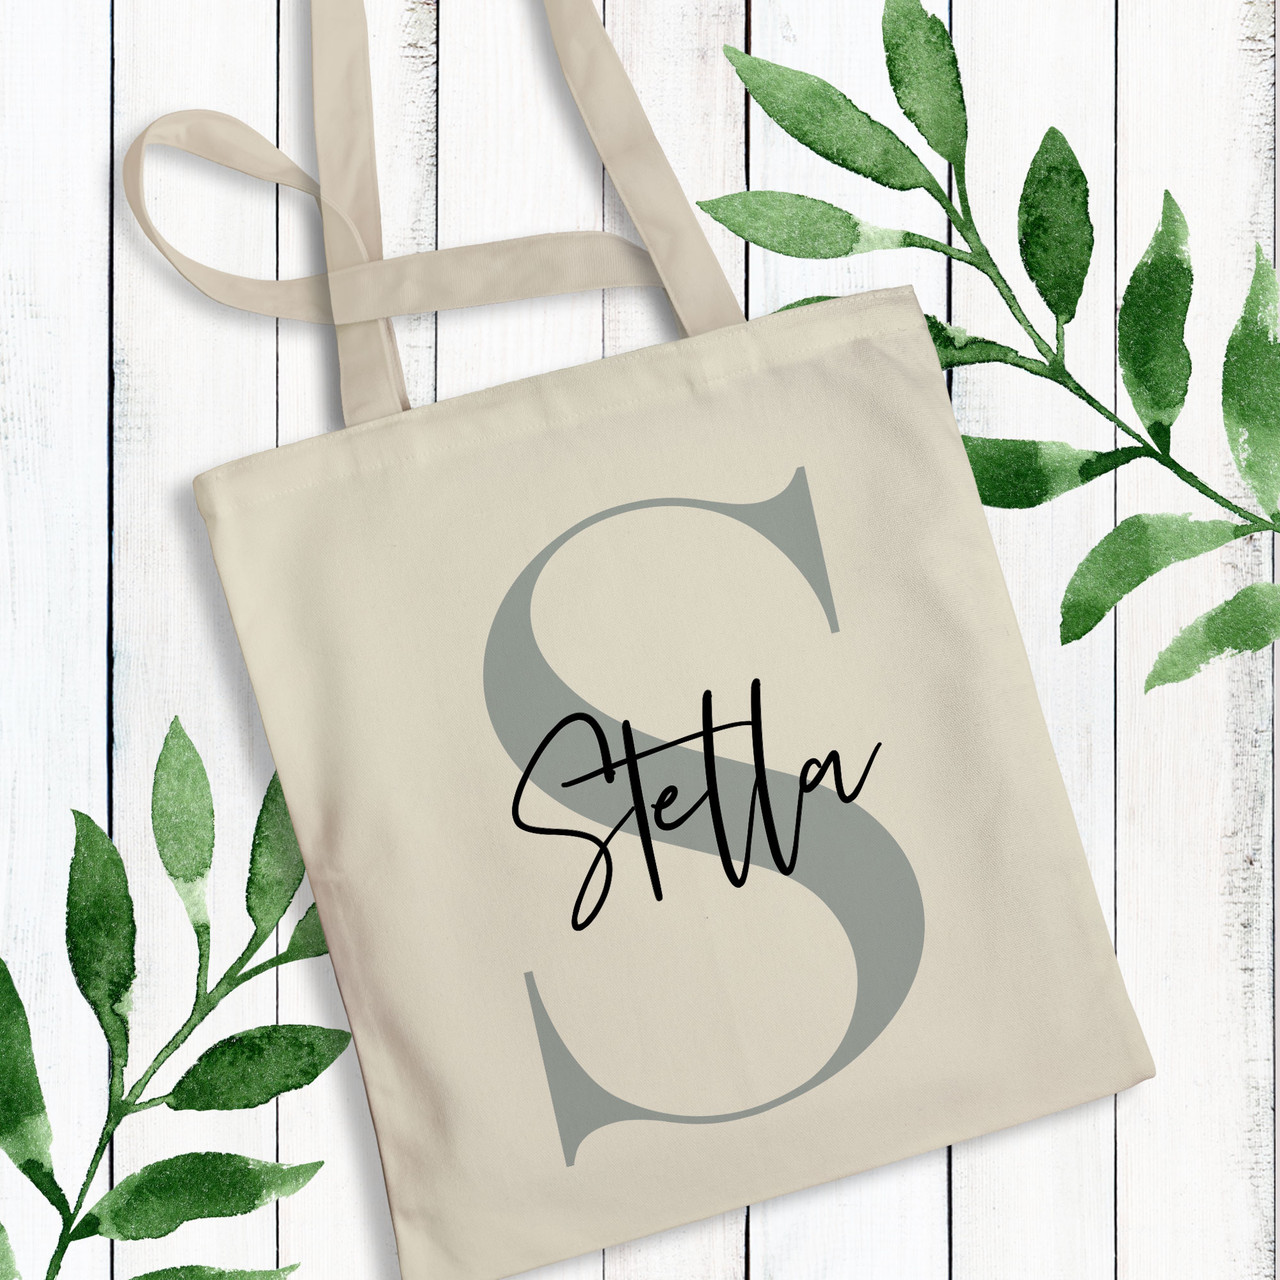 Monogram Name Tote Bag, Personalized Tote Bags, Bridesmaid Tote, Beach Tote,  Bridesmaid Gift, Bridal Party Gifts, Wedding Welcome Bag